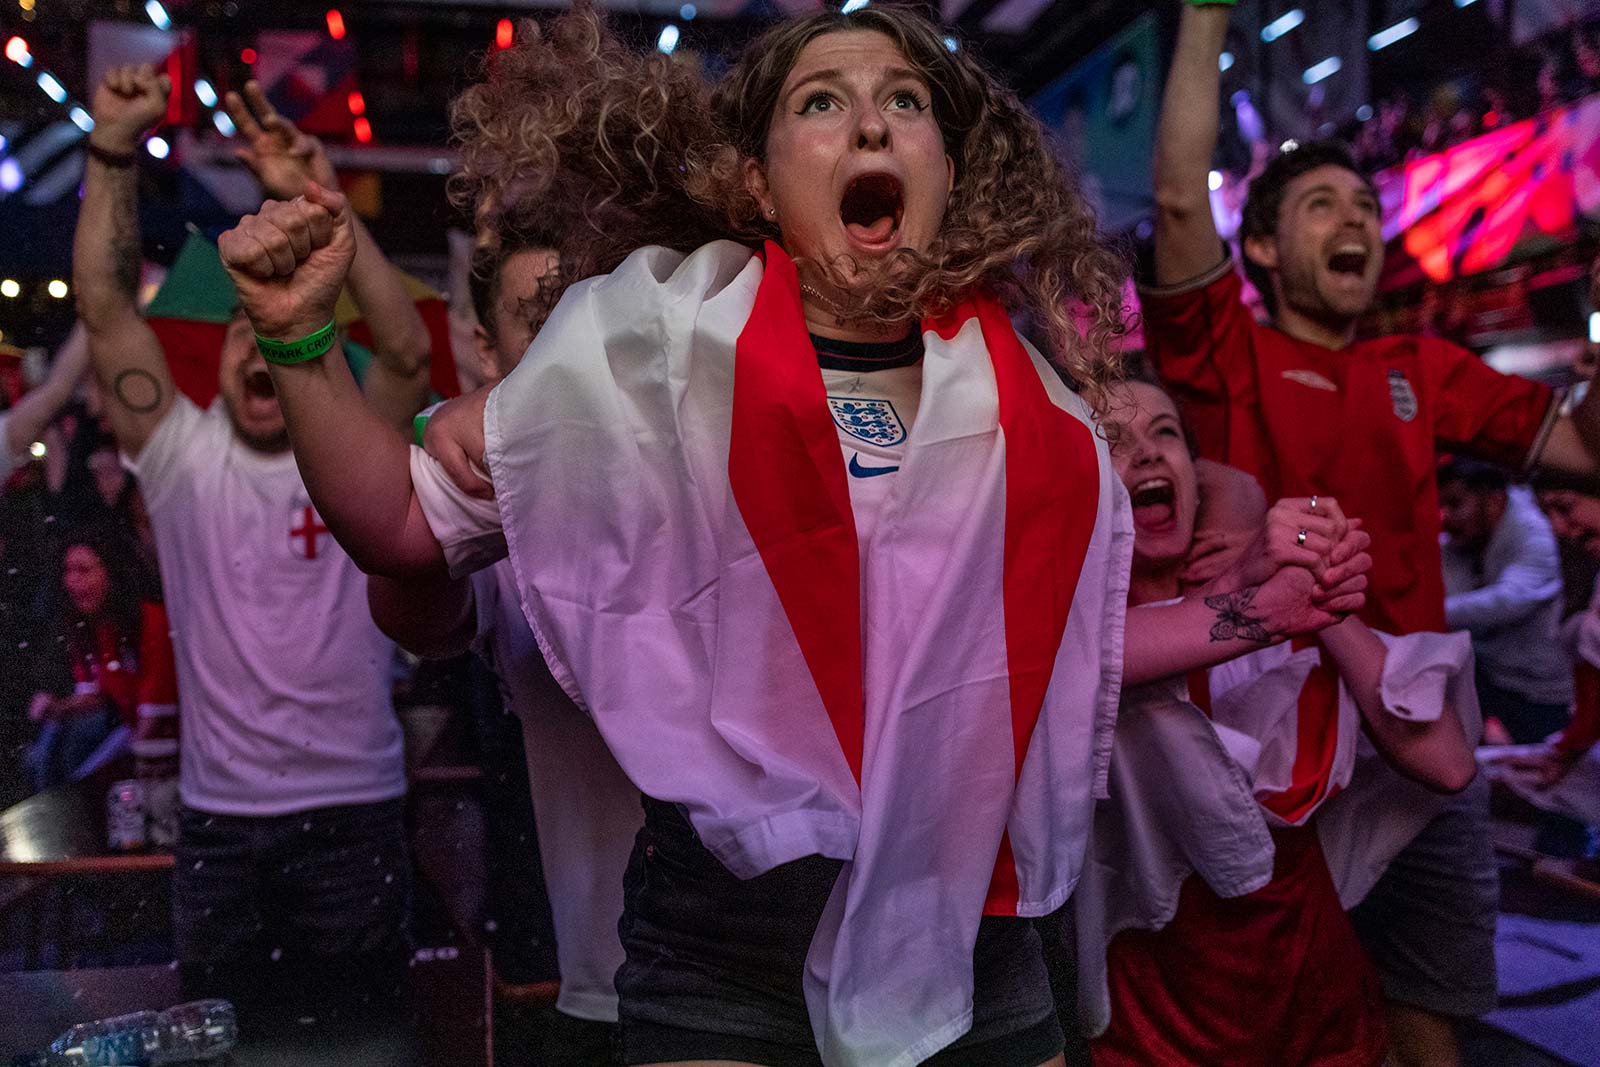 Excited England fan wrapped in a flag